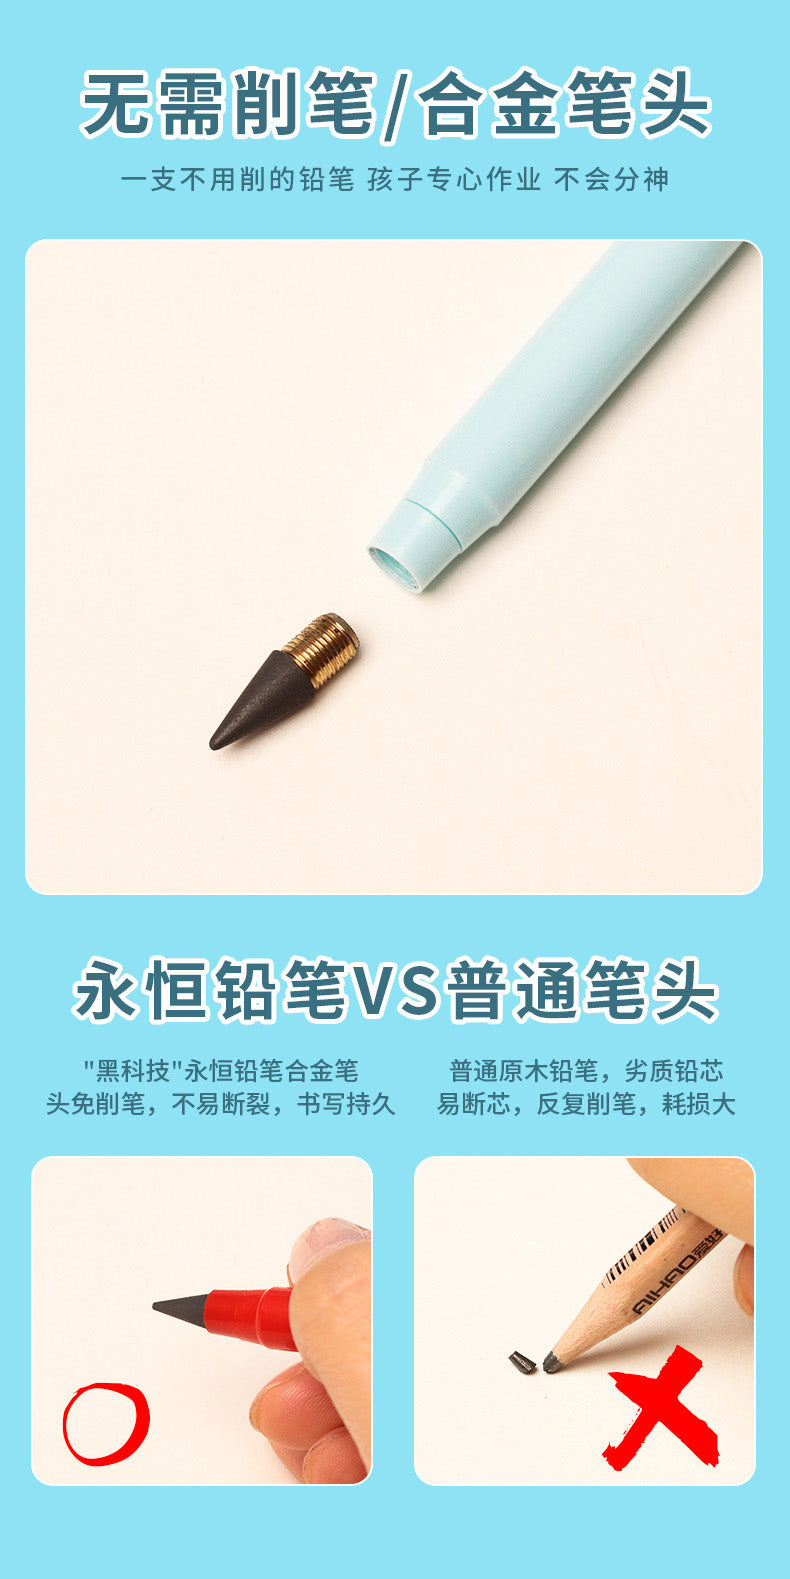 New Technology Unlimited Writing Pencil Inkless Pen for Writing Art Sketch Painting Tool Kids Gifts School Supplies